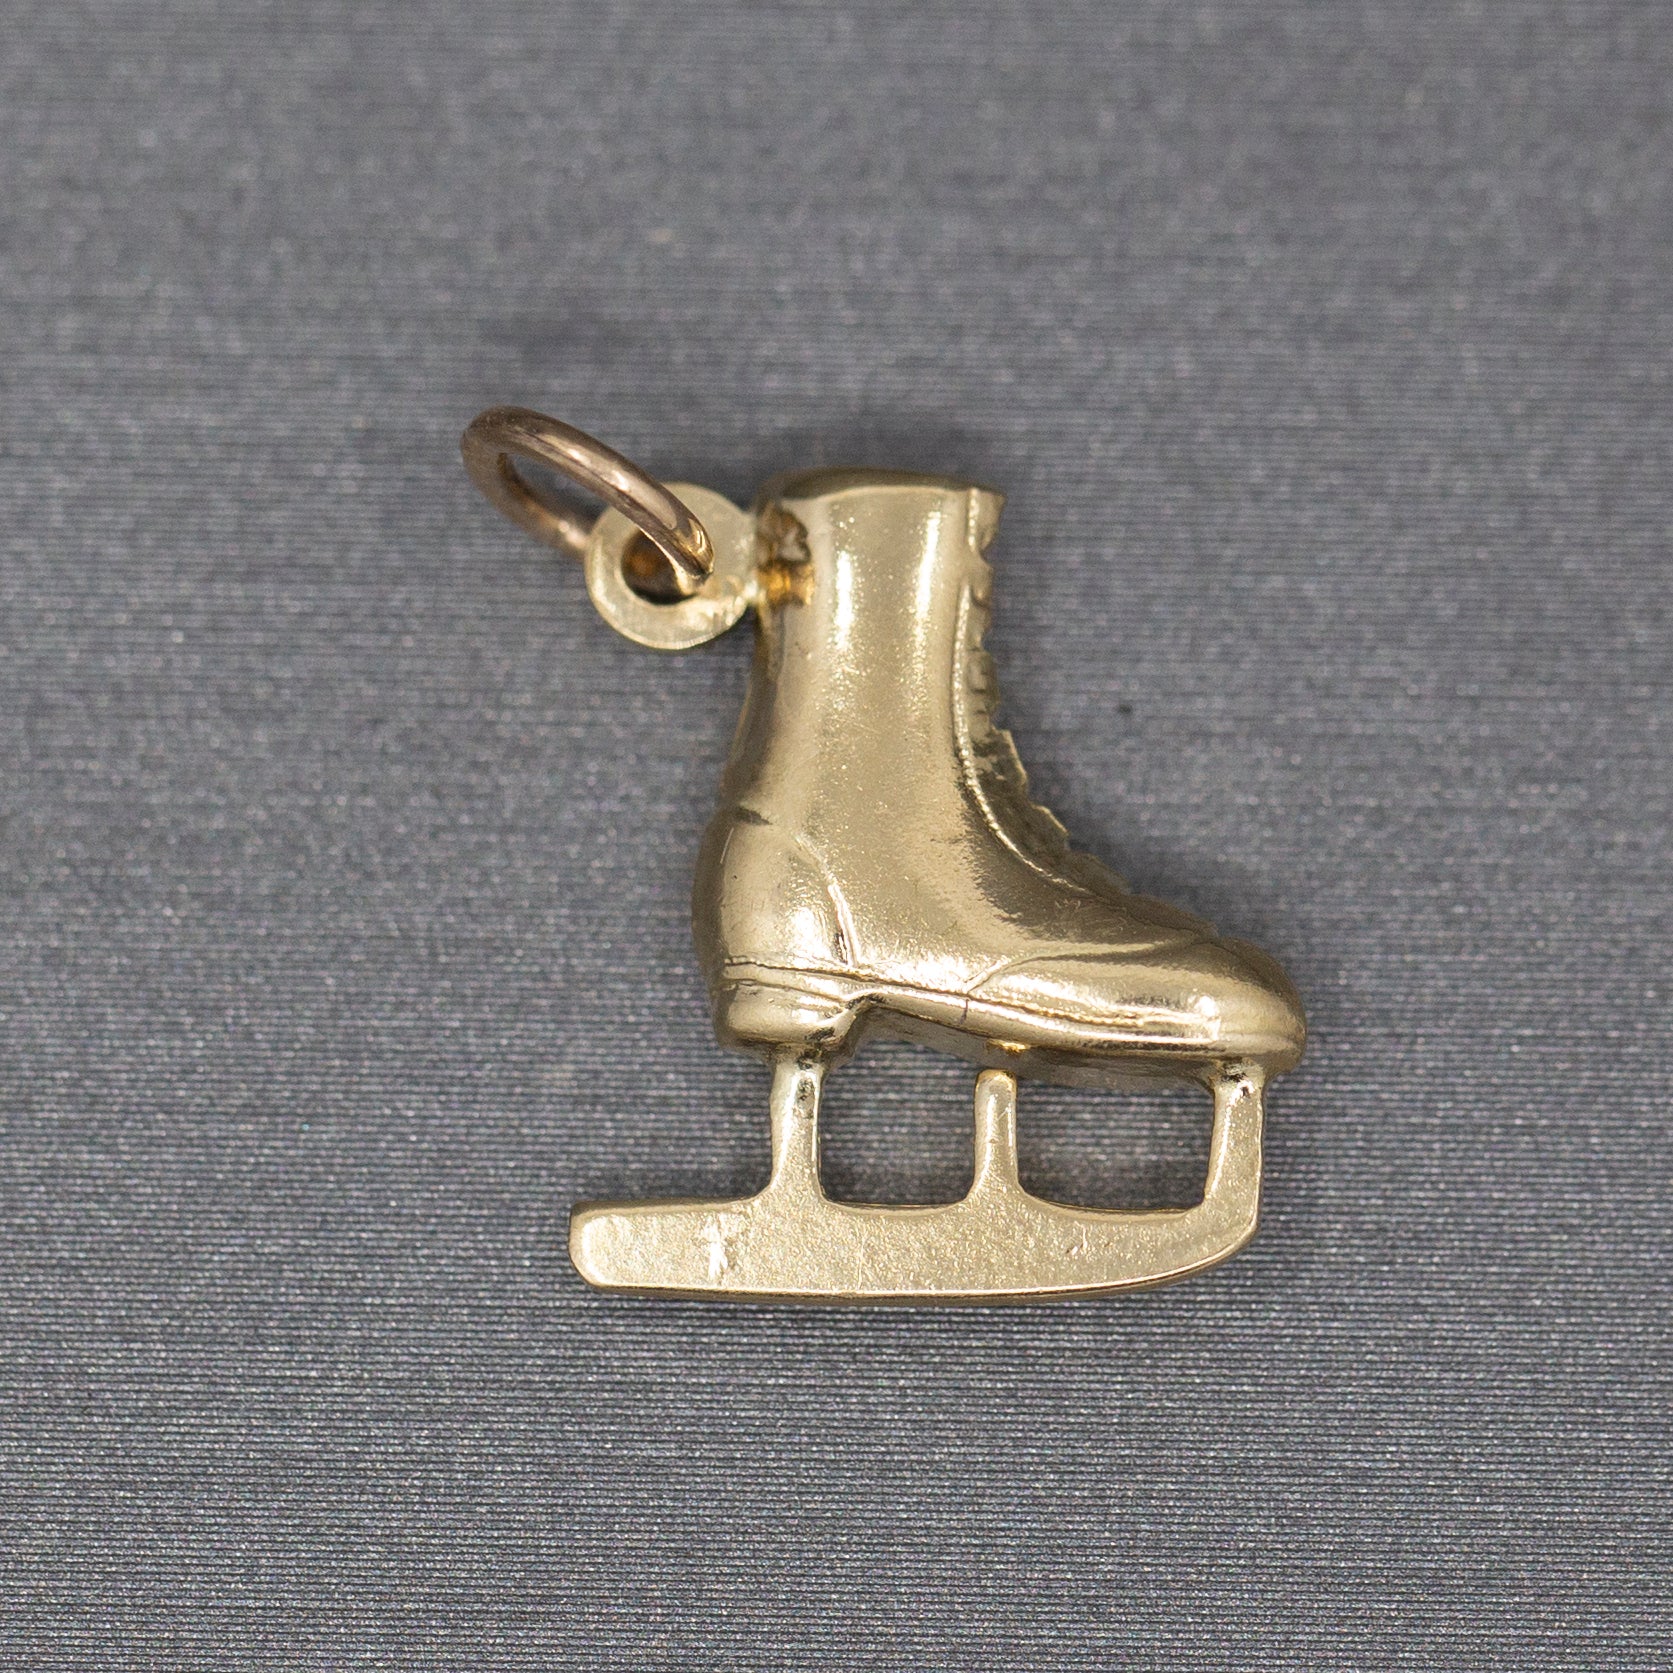 Shiny Vintage Ice Skate Pendant Charm in 14k Yellow Gold